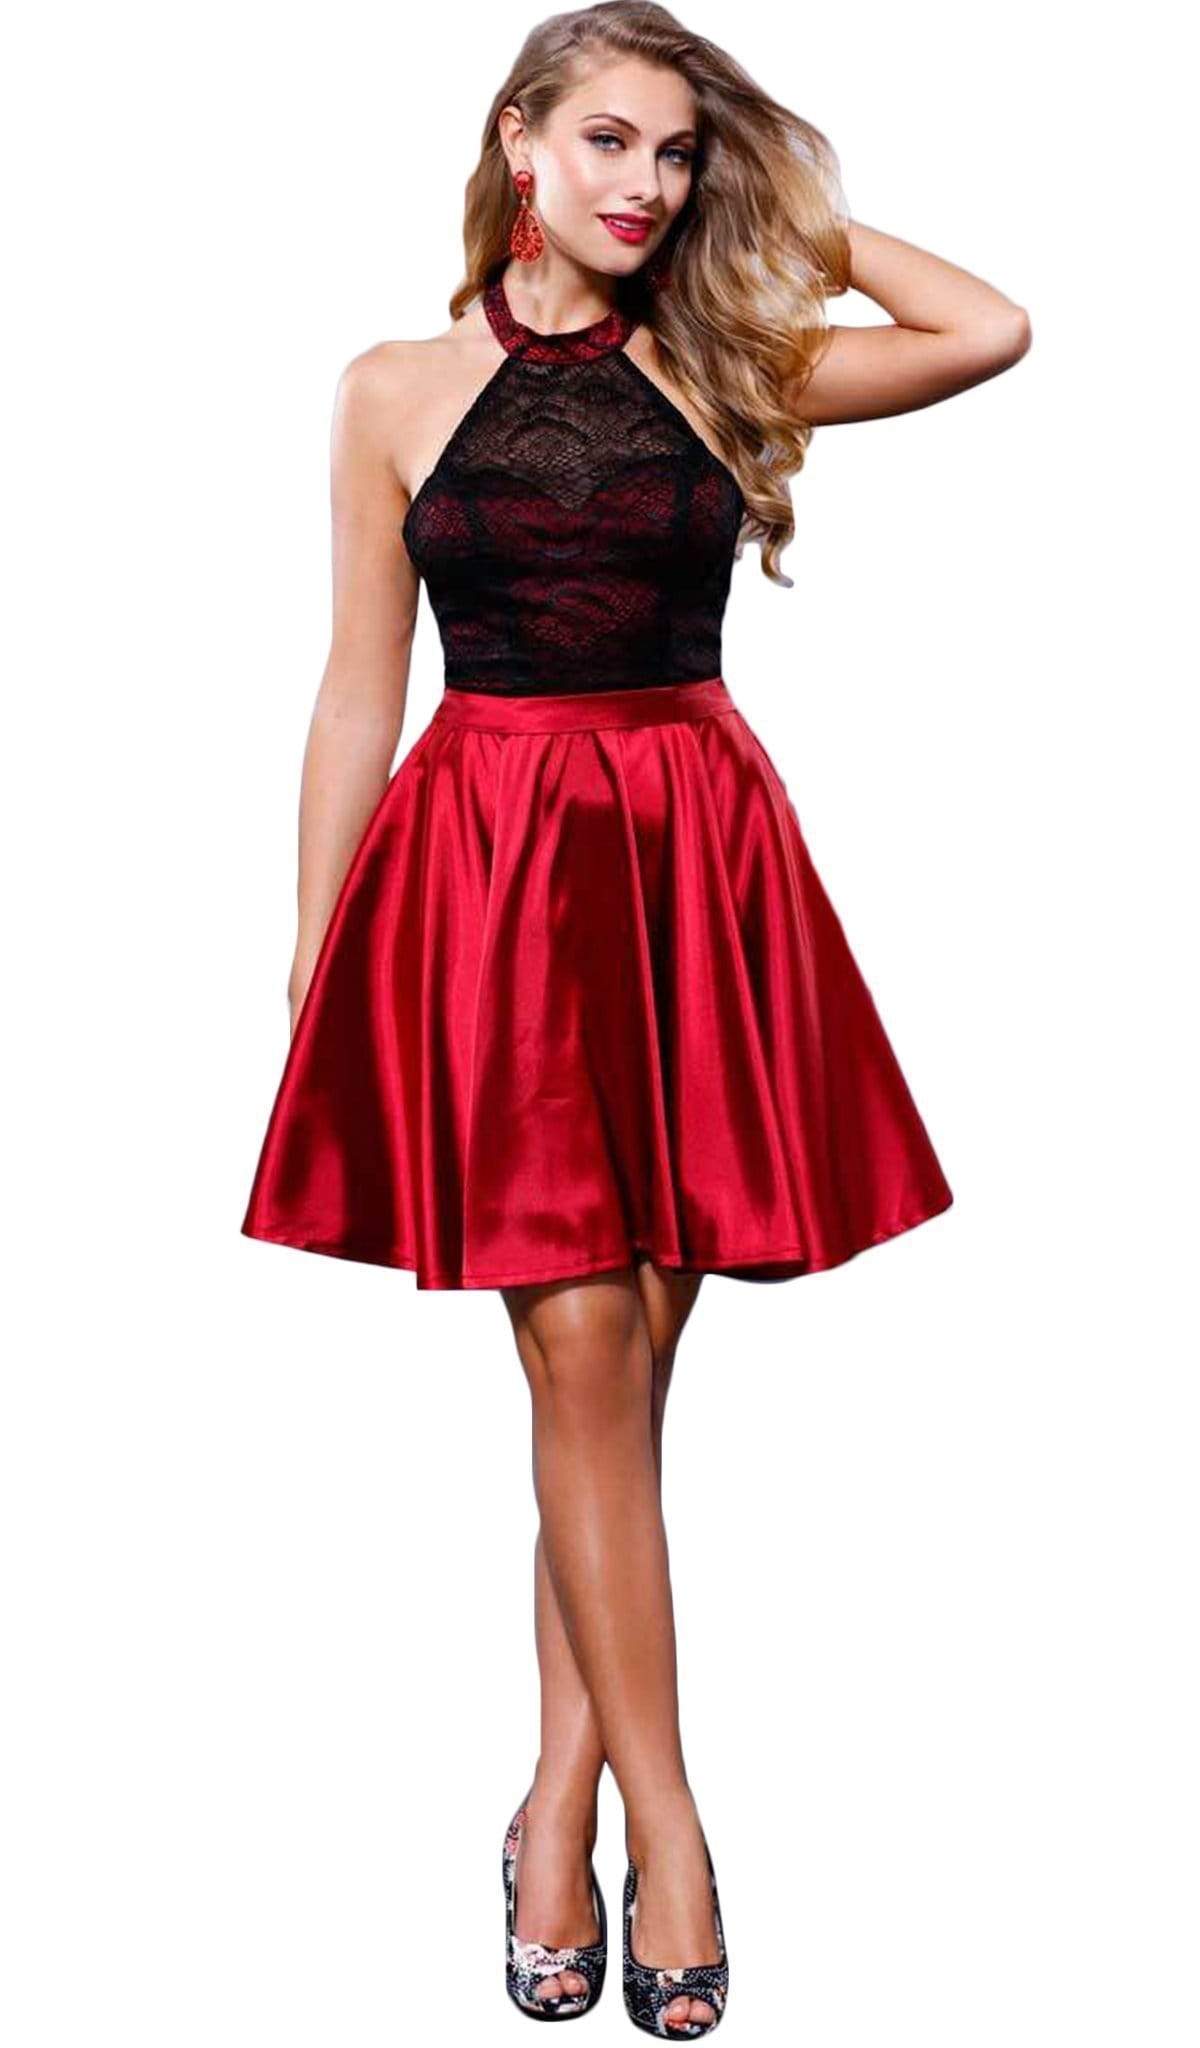 Nox Anabel - 6217 Illusion Laced Halter Short Prom Dress Special Occasion Dress XS / Black & Red